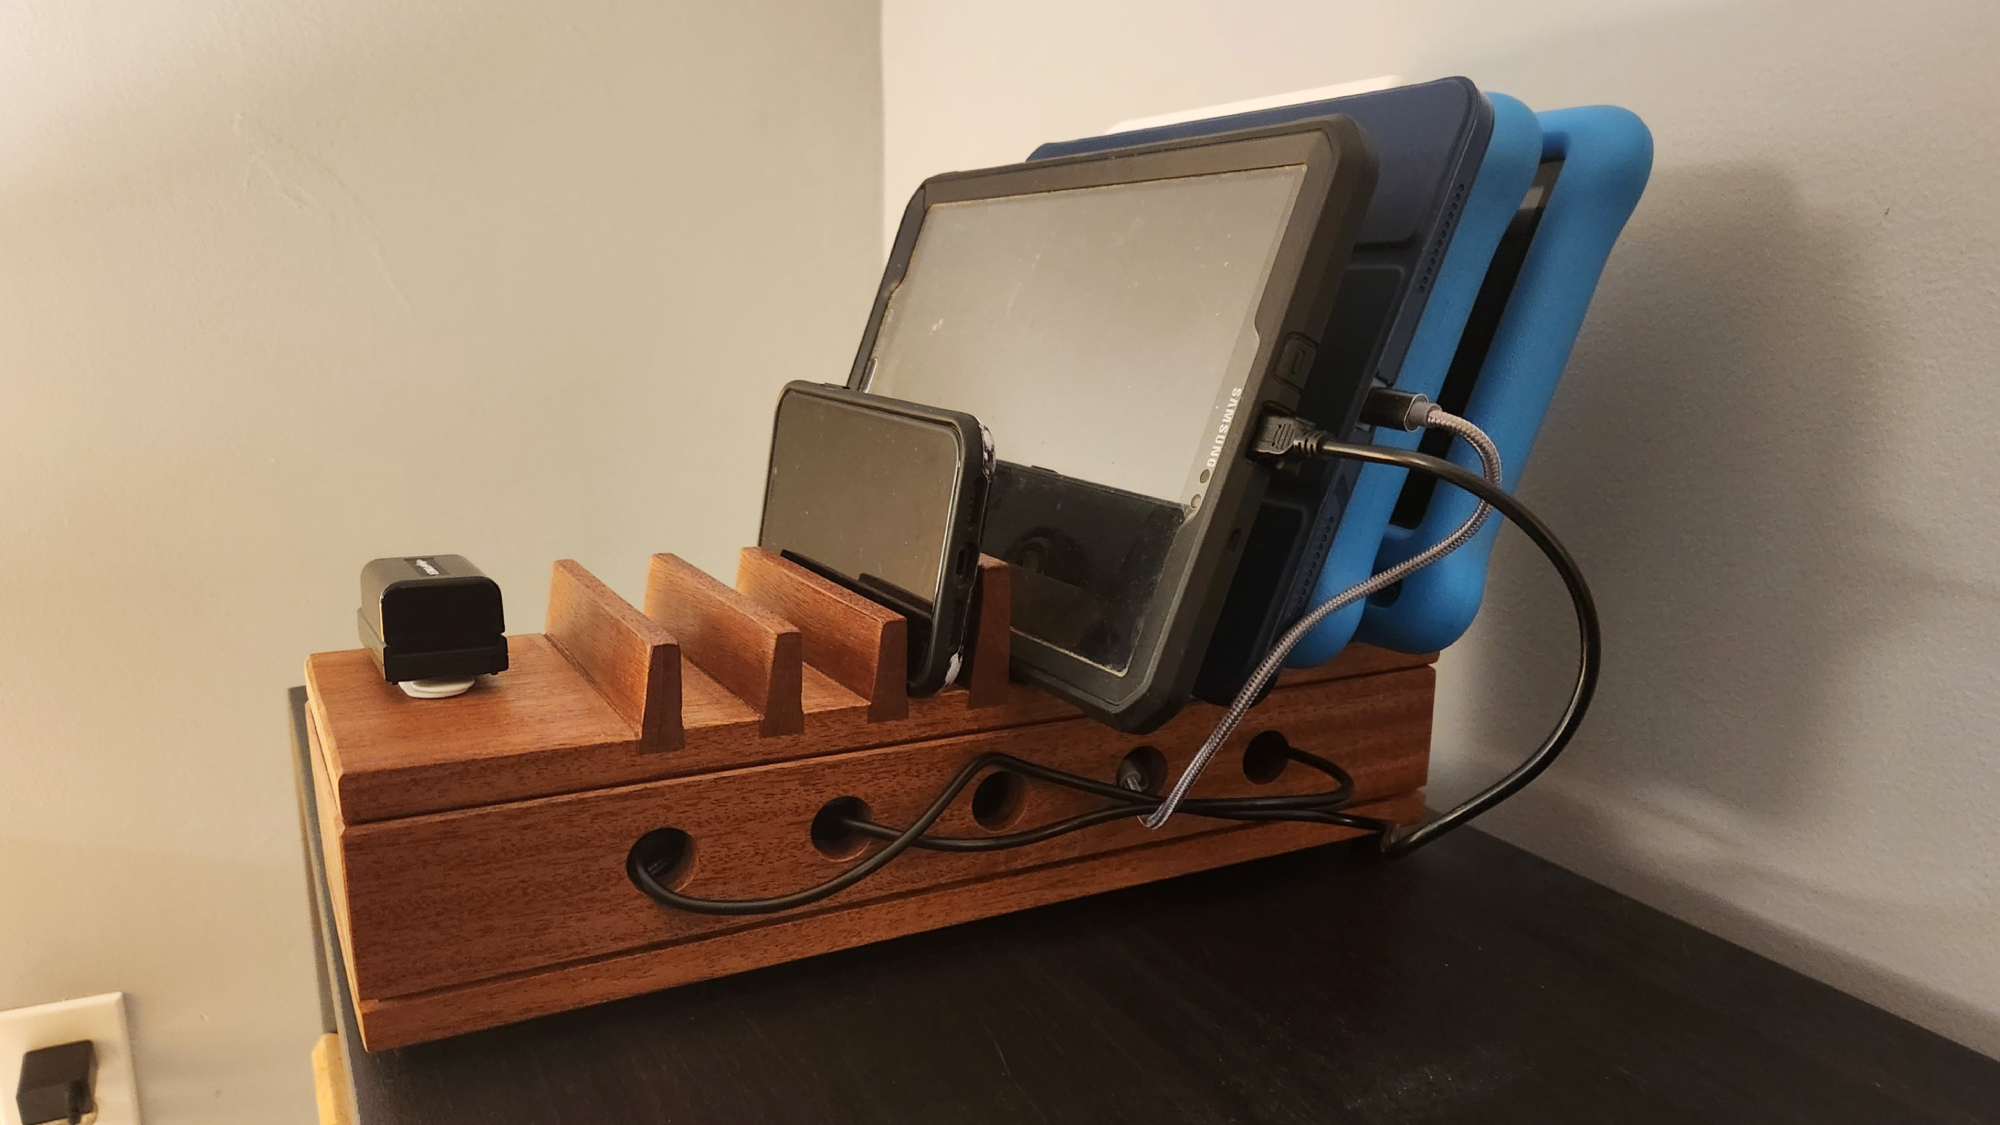 How To Make A DIY Charging Station For Electronic Devices